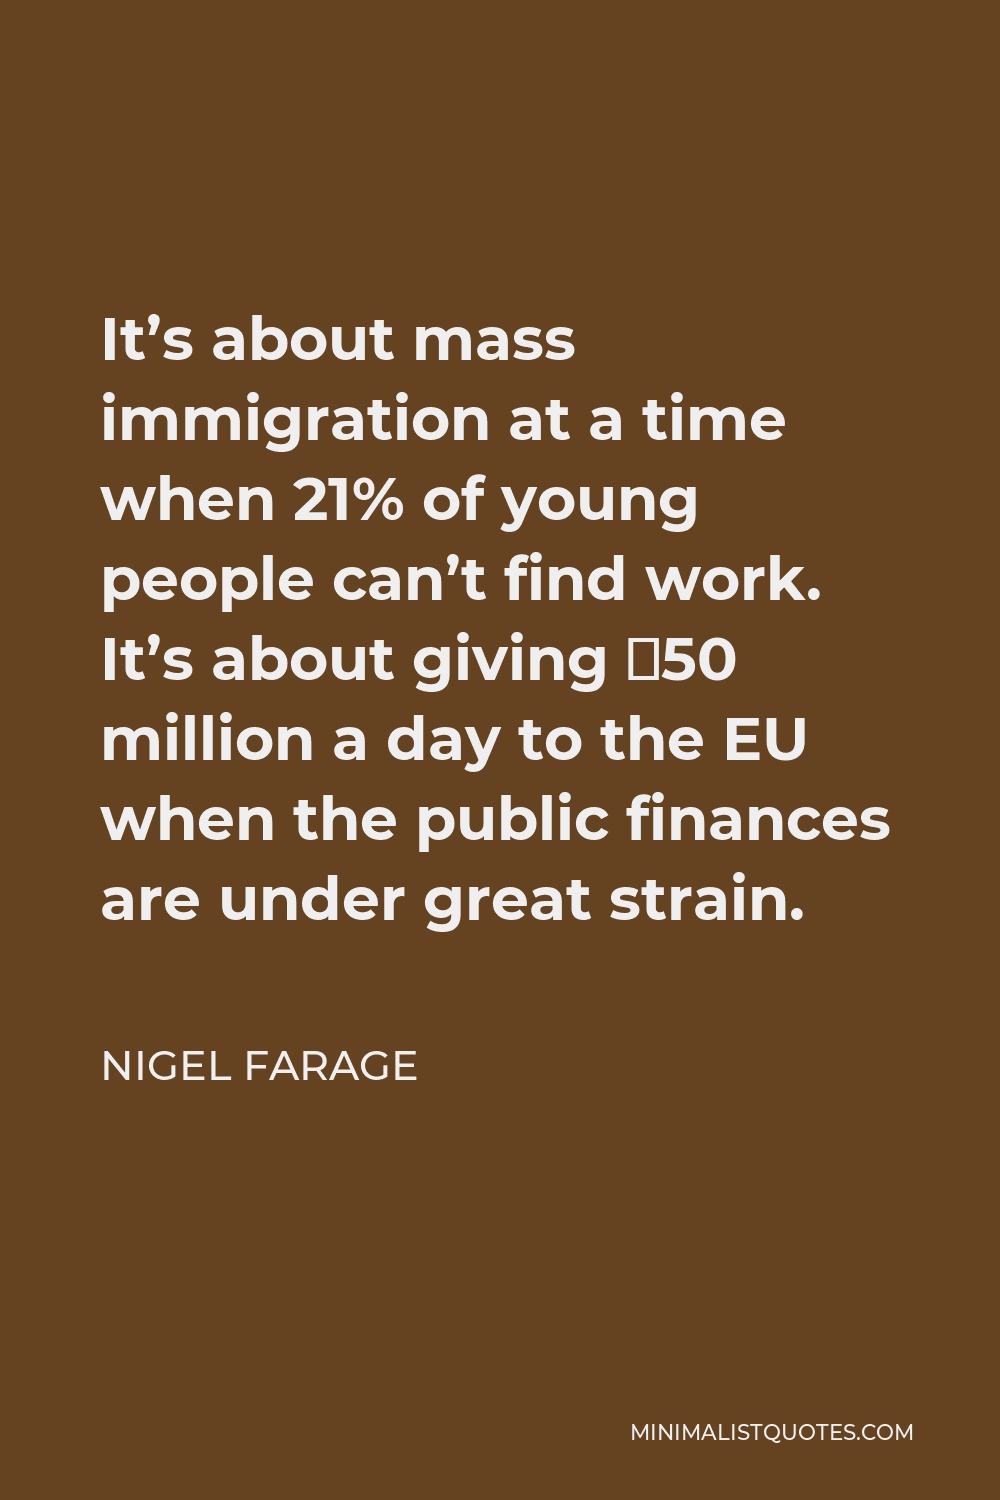 Nigel Farage Quote - It’s about mass immigration at a time when 21% of young people can’t find work. It’s about giving £50 million a day to the EU when the public finances are under great strain.